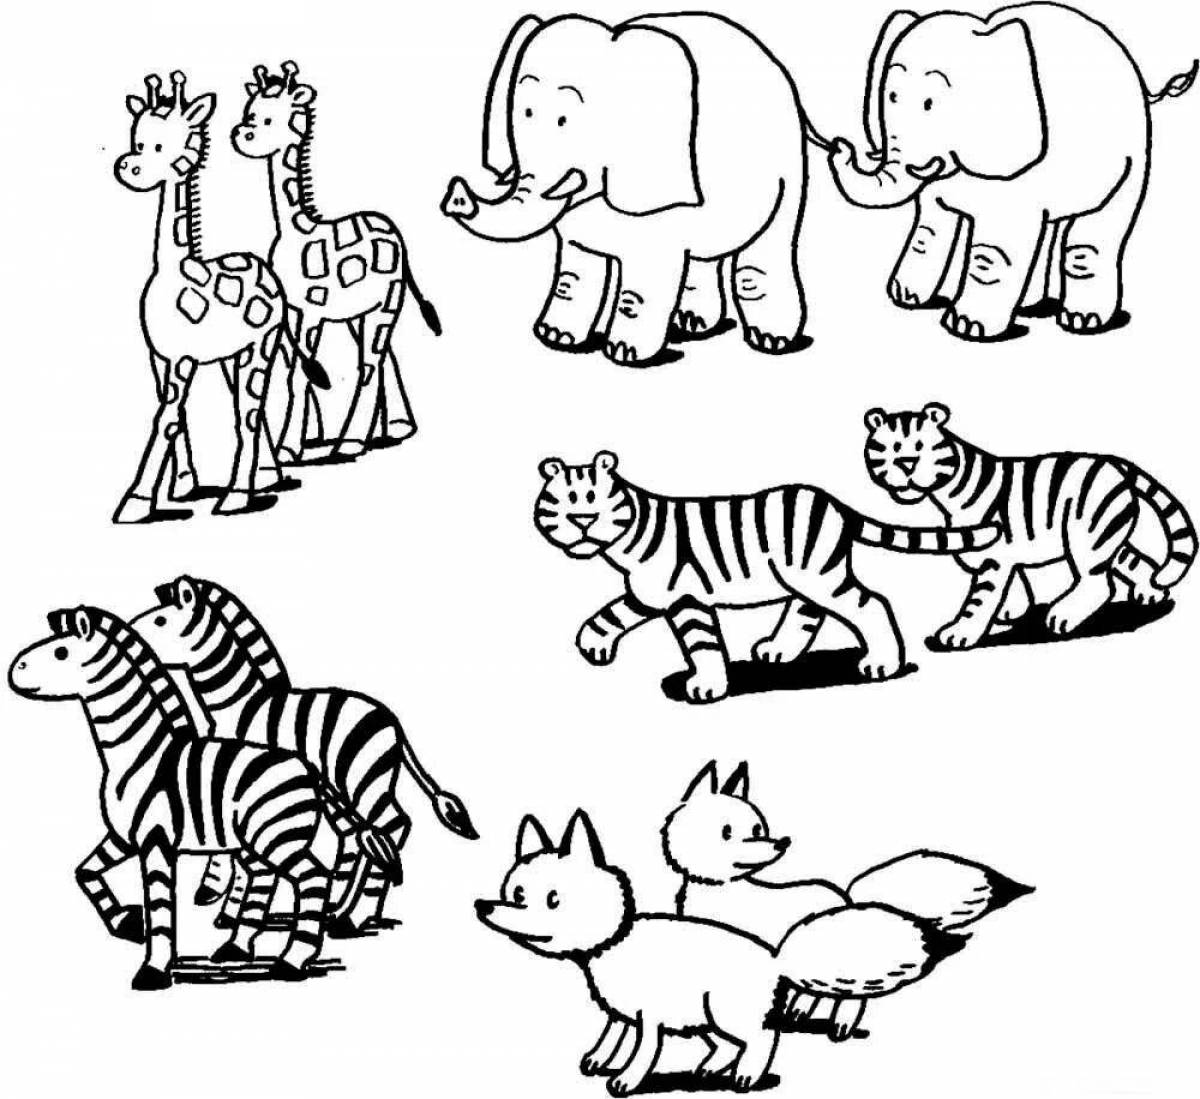 Outstanding animal coloring pages grade 1